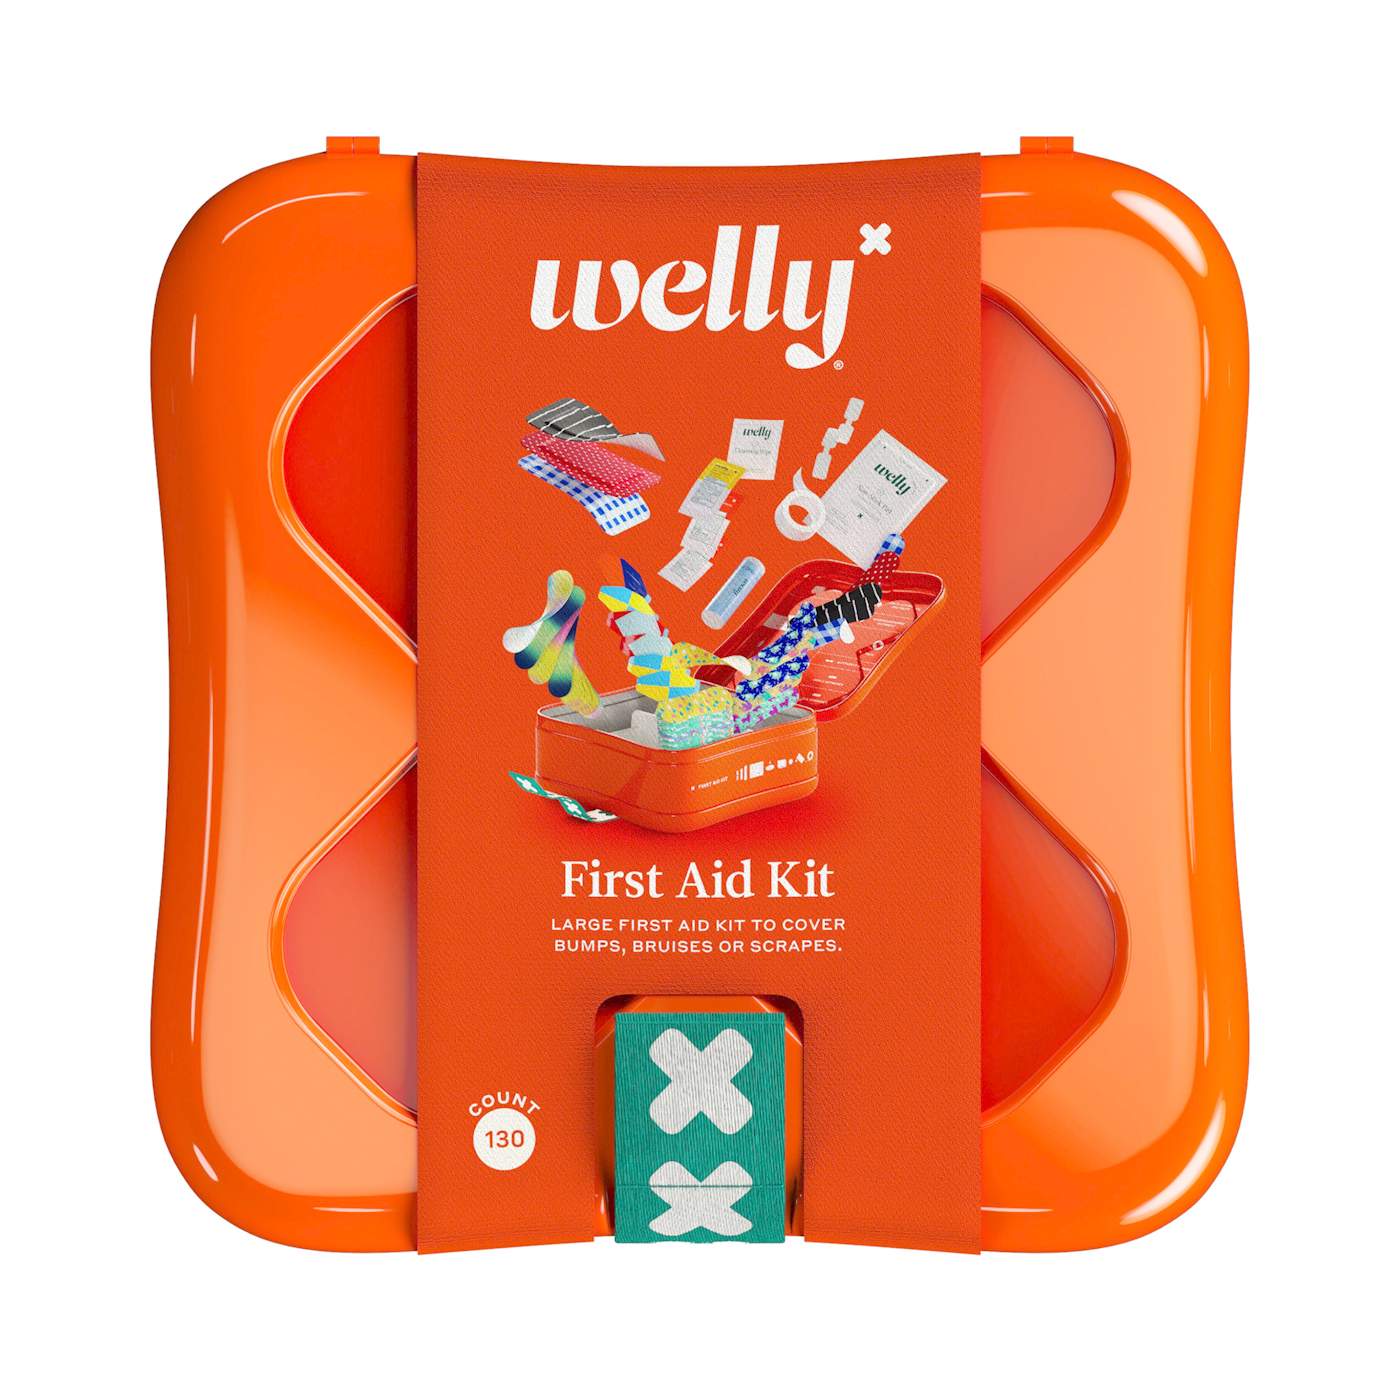 Welly First Aid Kit; image 1 of 2